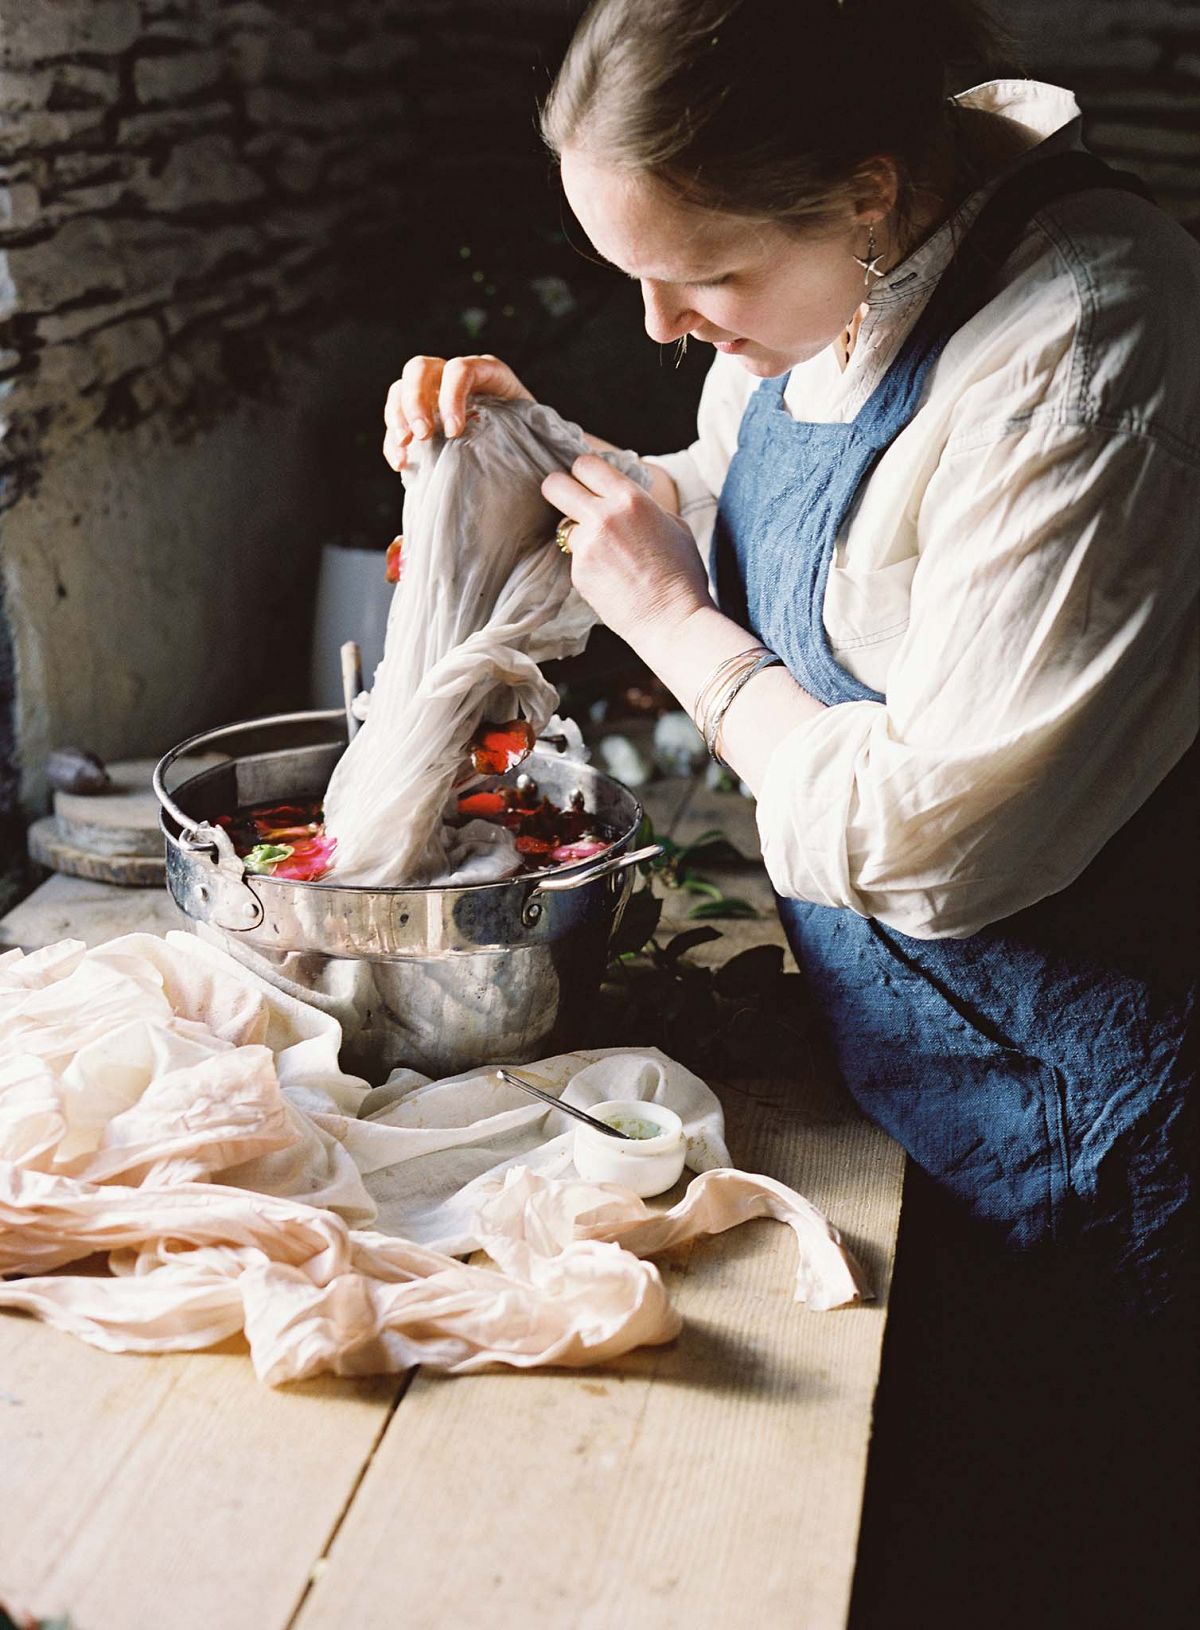 Artisan Profile: The Making of the Wedding Dress, Ribbons, and Stationery